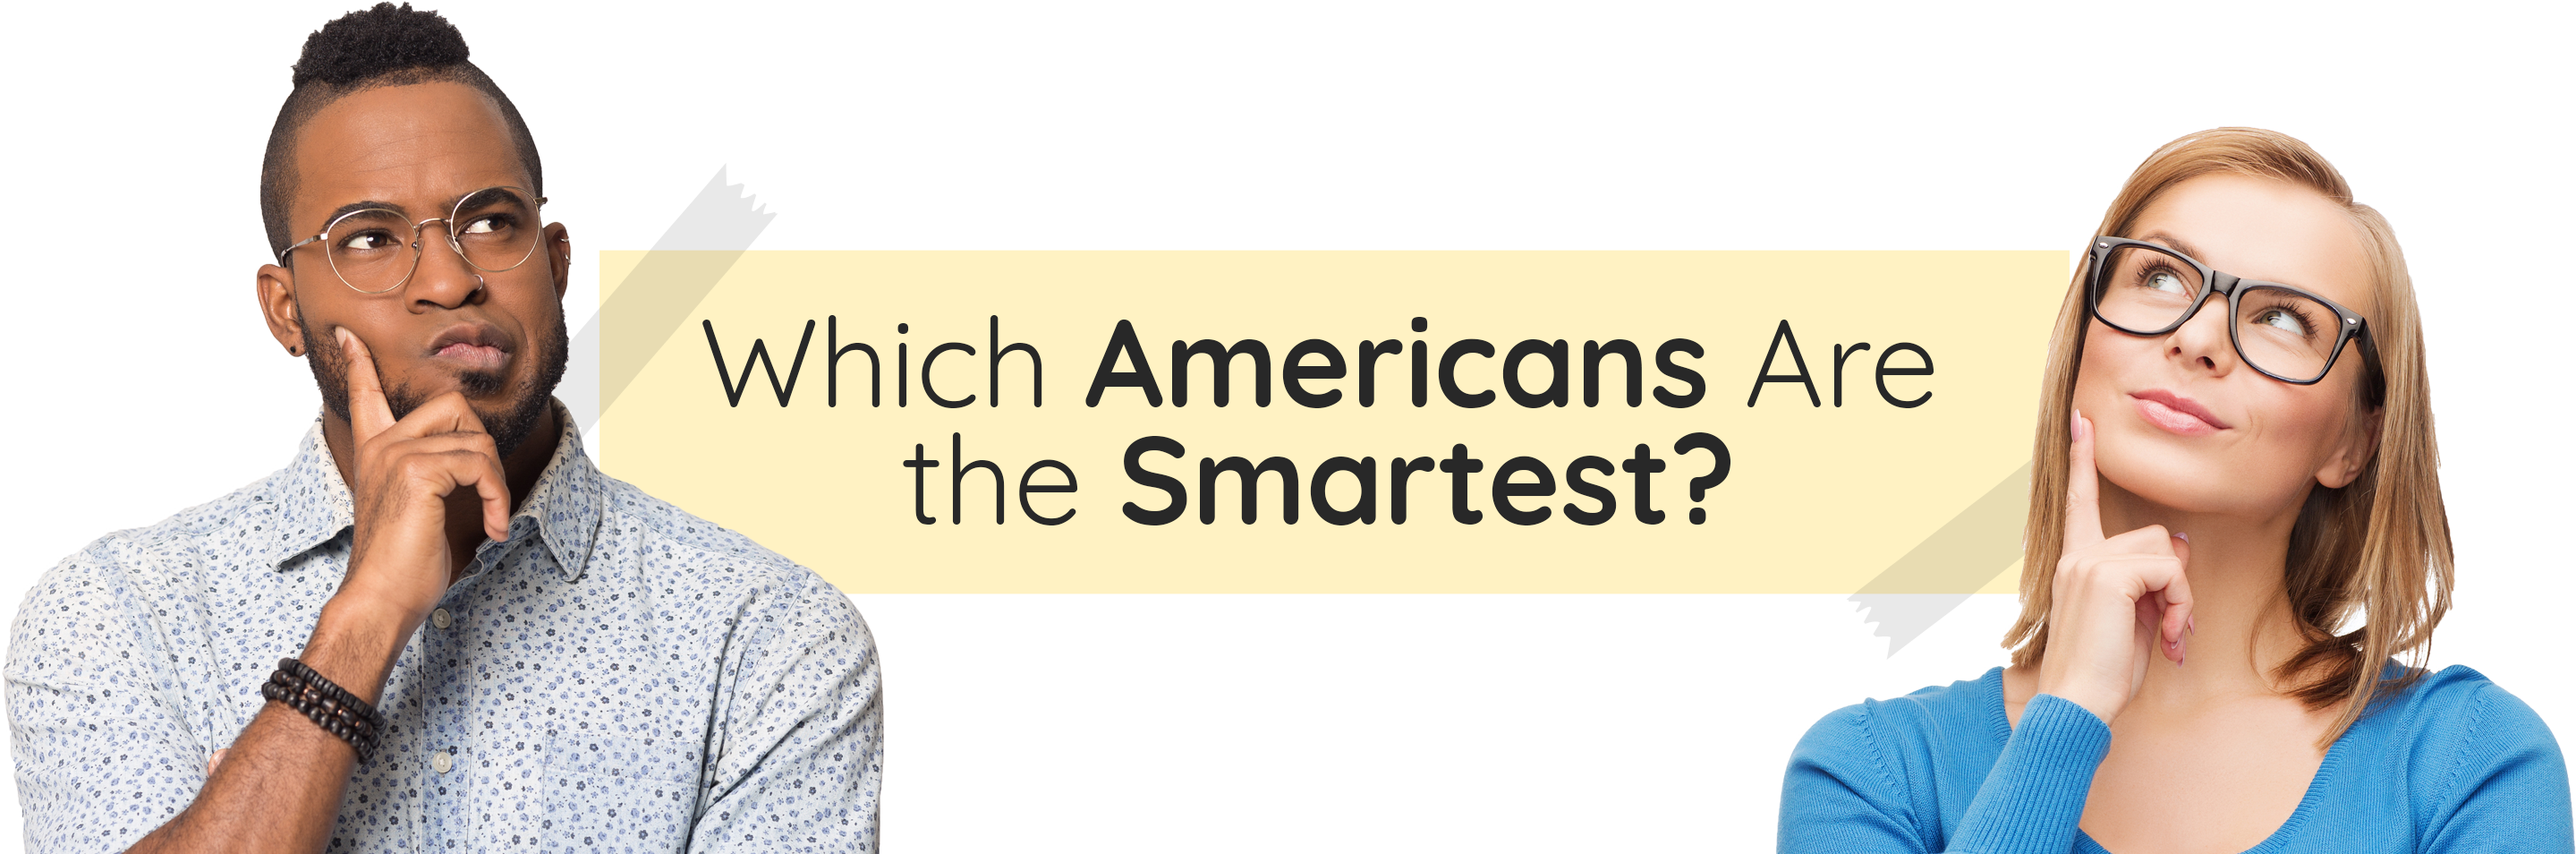 Which Americans Are the Smartest?